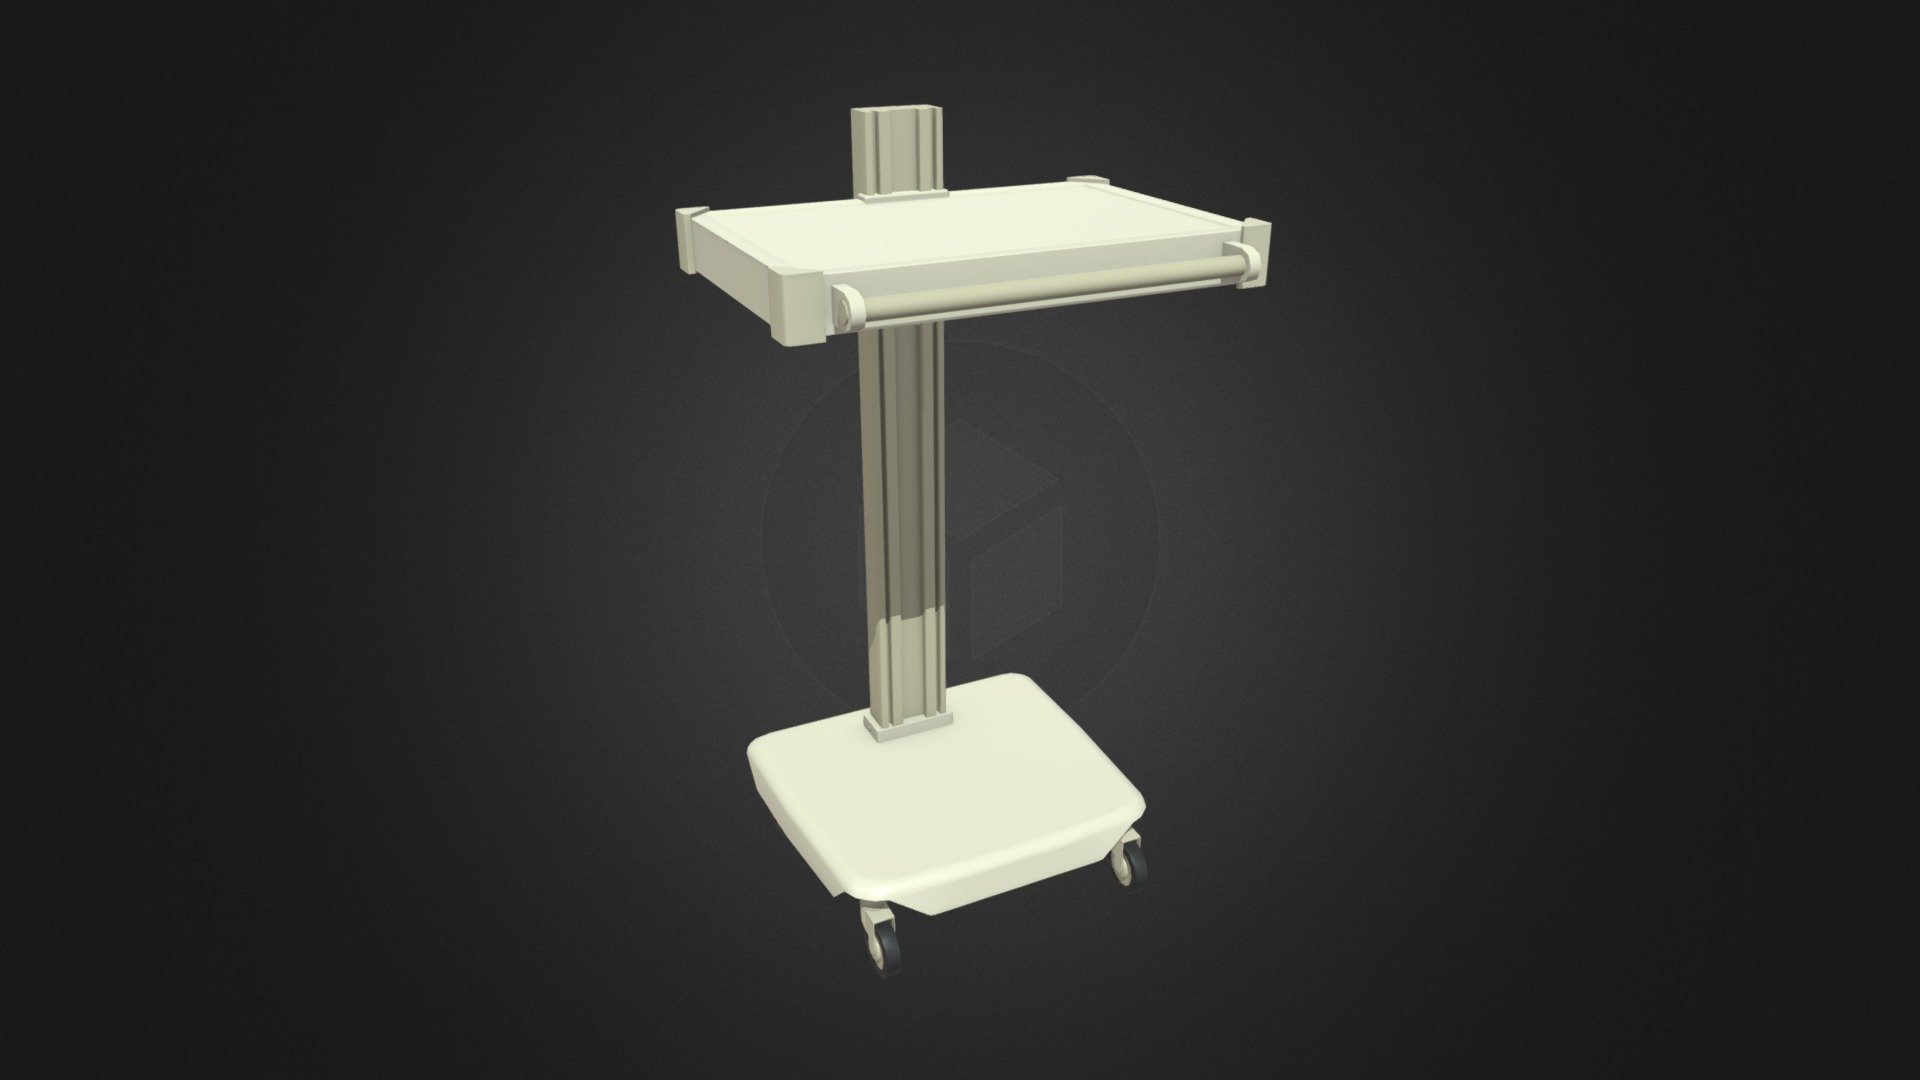 A little push around surface for a medical sim we're working on at UVU - Medical Cart - 3D model by Ethan Cragun (@EDIIIC) 3d model